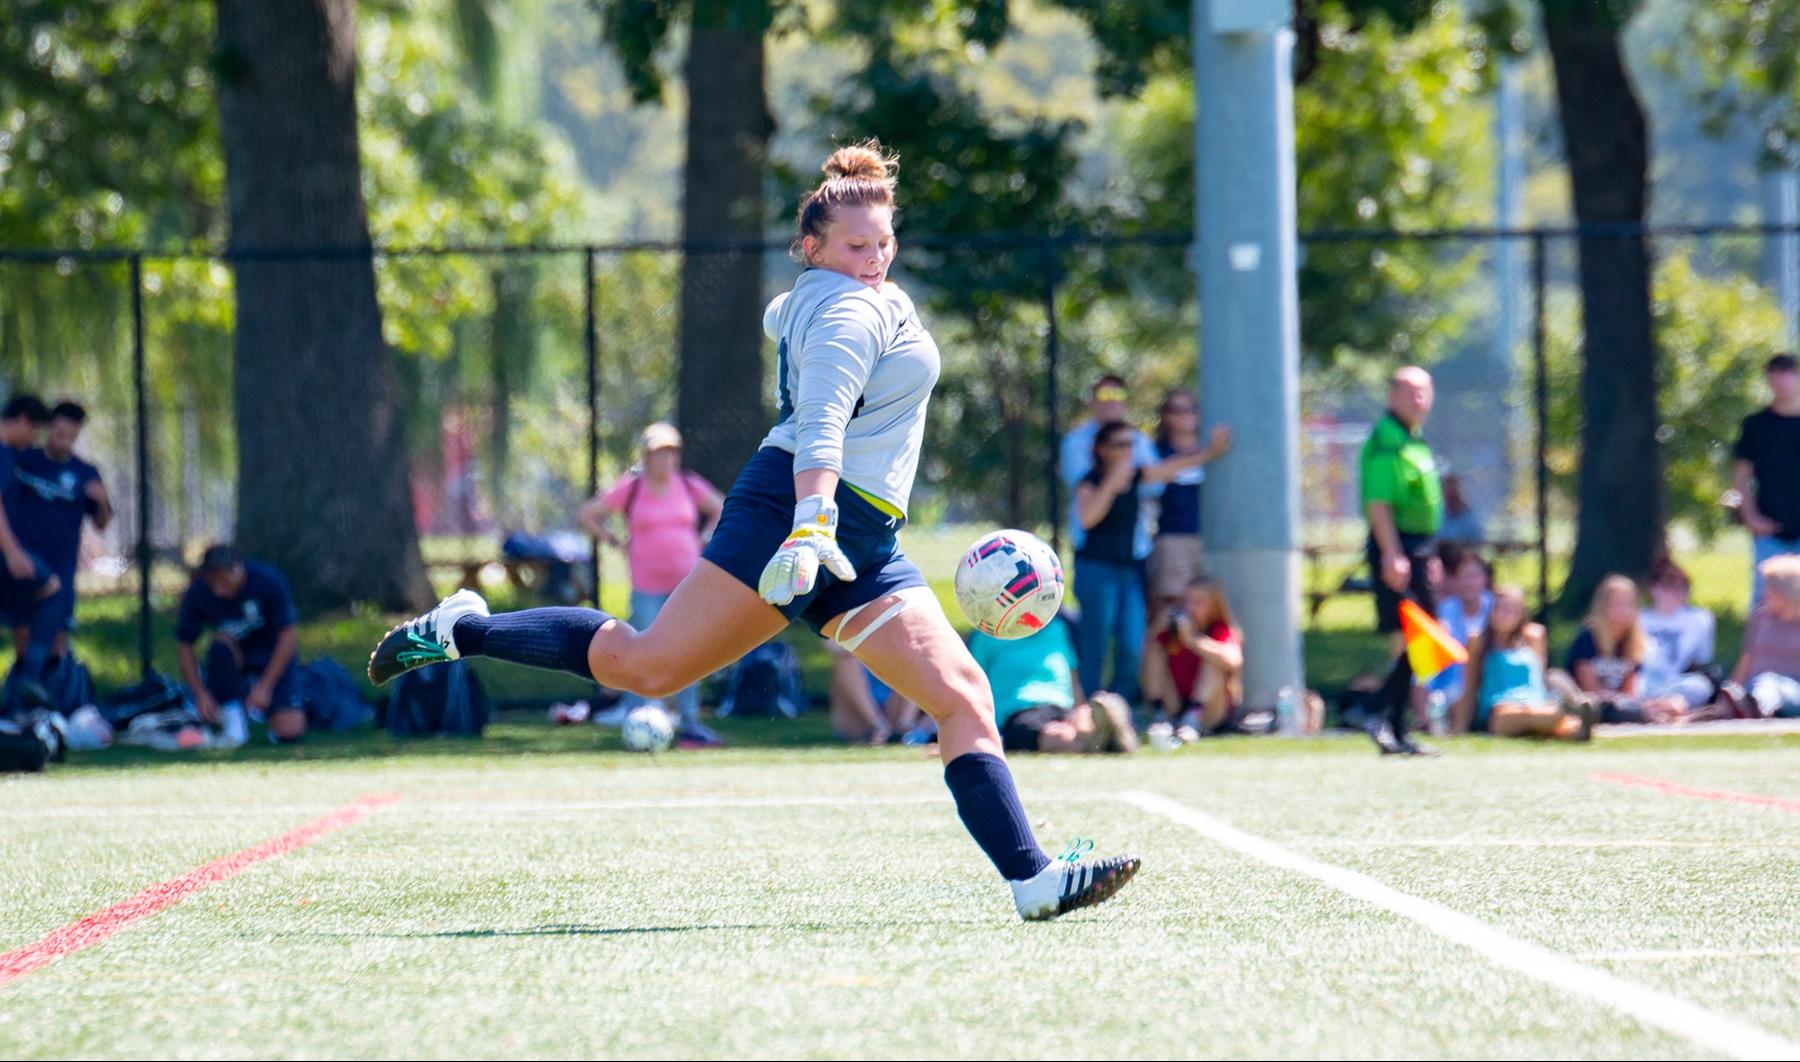 The King's College Women's Soccer goalkeeper Bailey Kaufman punts the ball downfield.
Photo courtesy of Brandon Hill.